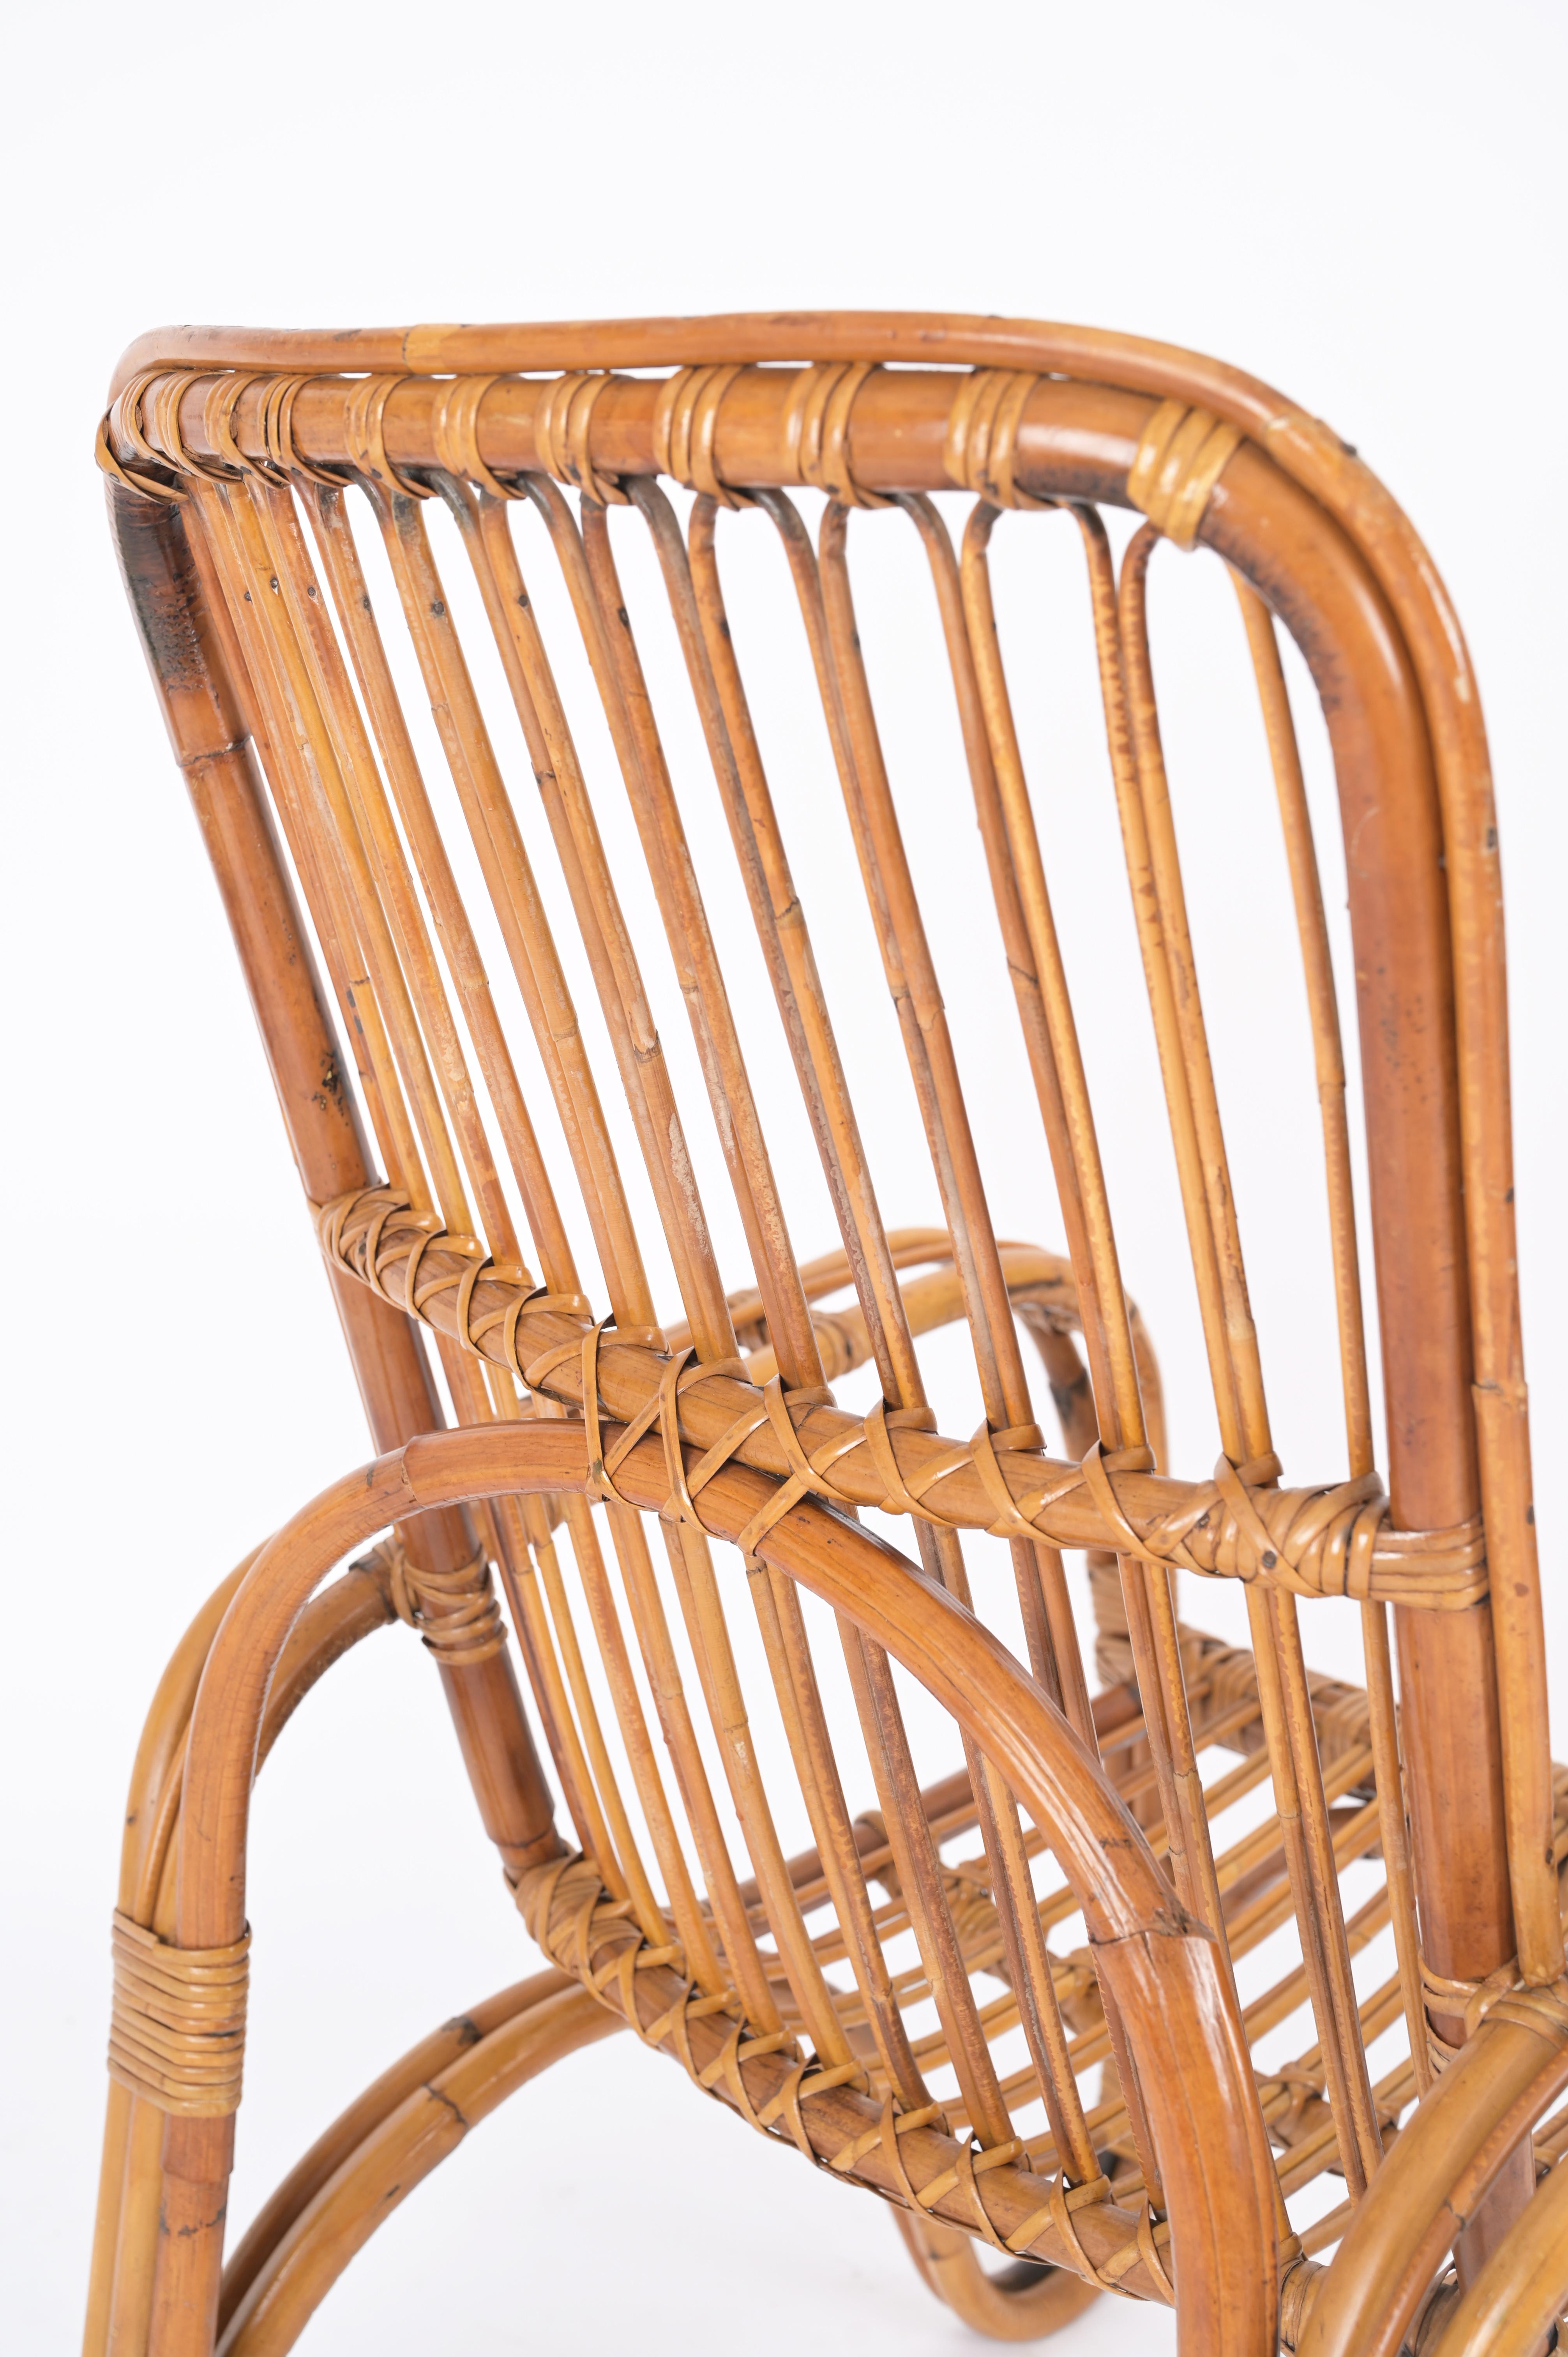 Bamboo Pair of Midcentury Italian Armchairs in Rattan and Wicker, Tito Agnoli, 1960s For Sale